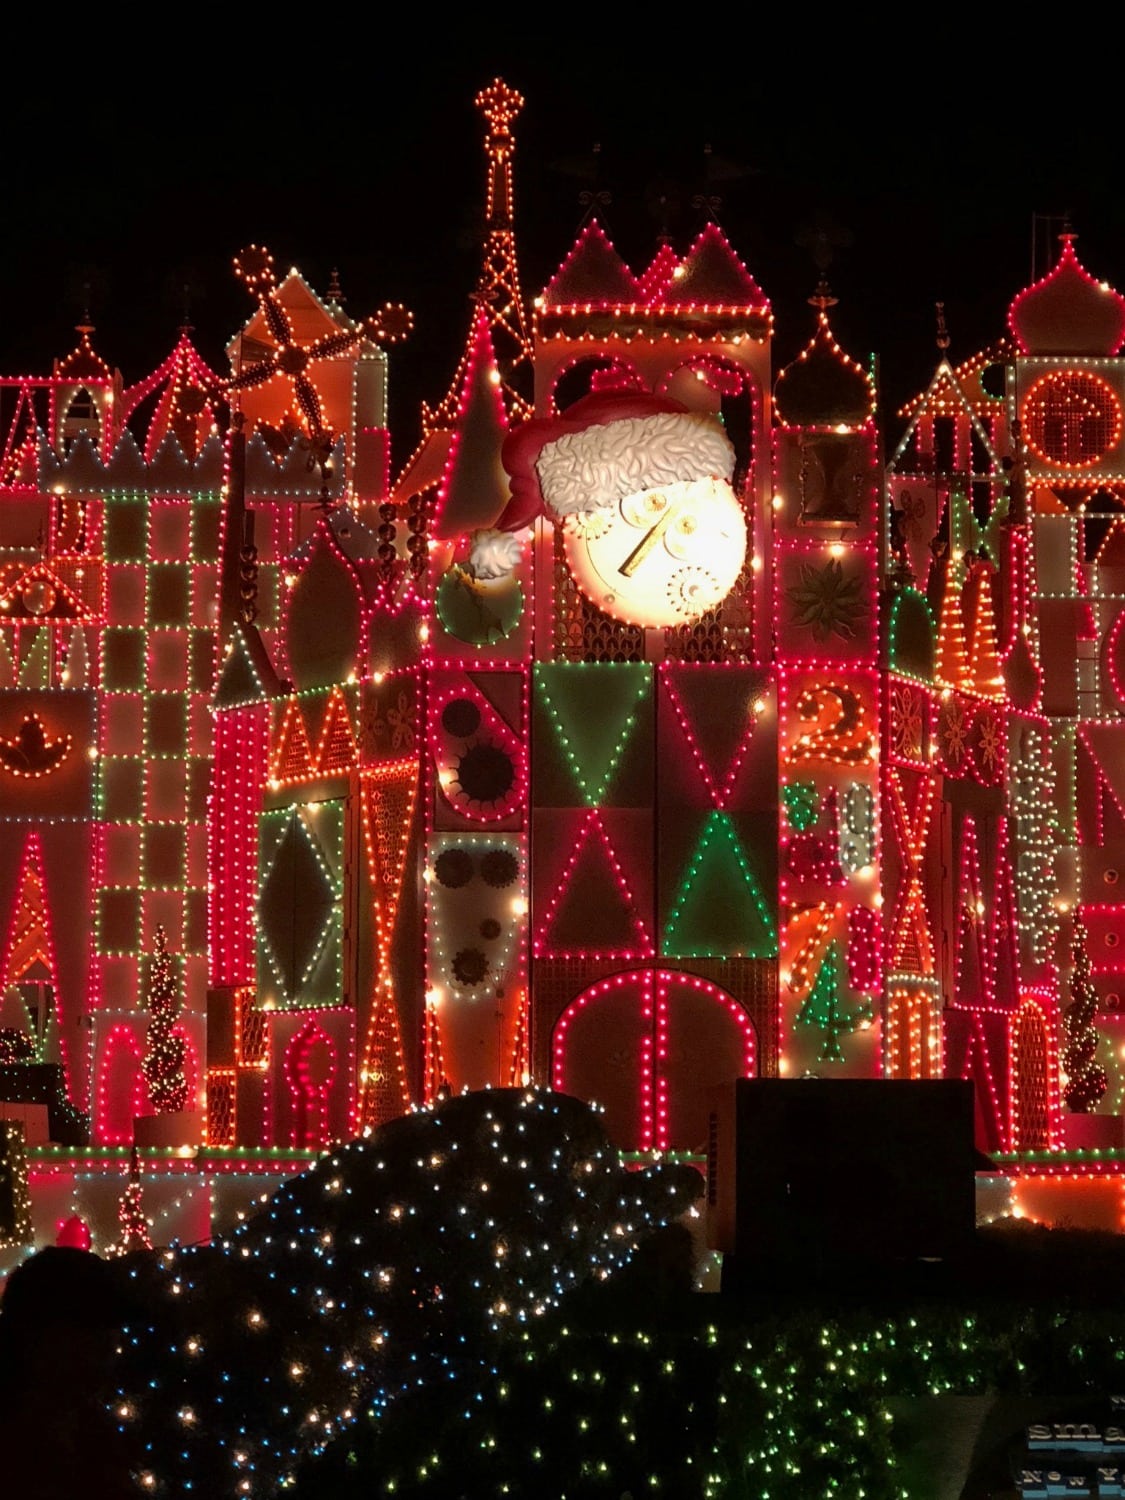 It's a small world Christmas